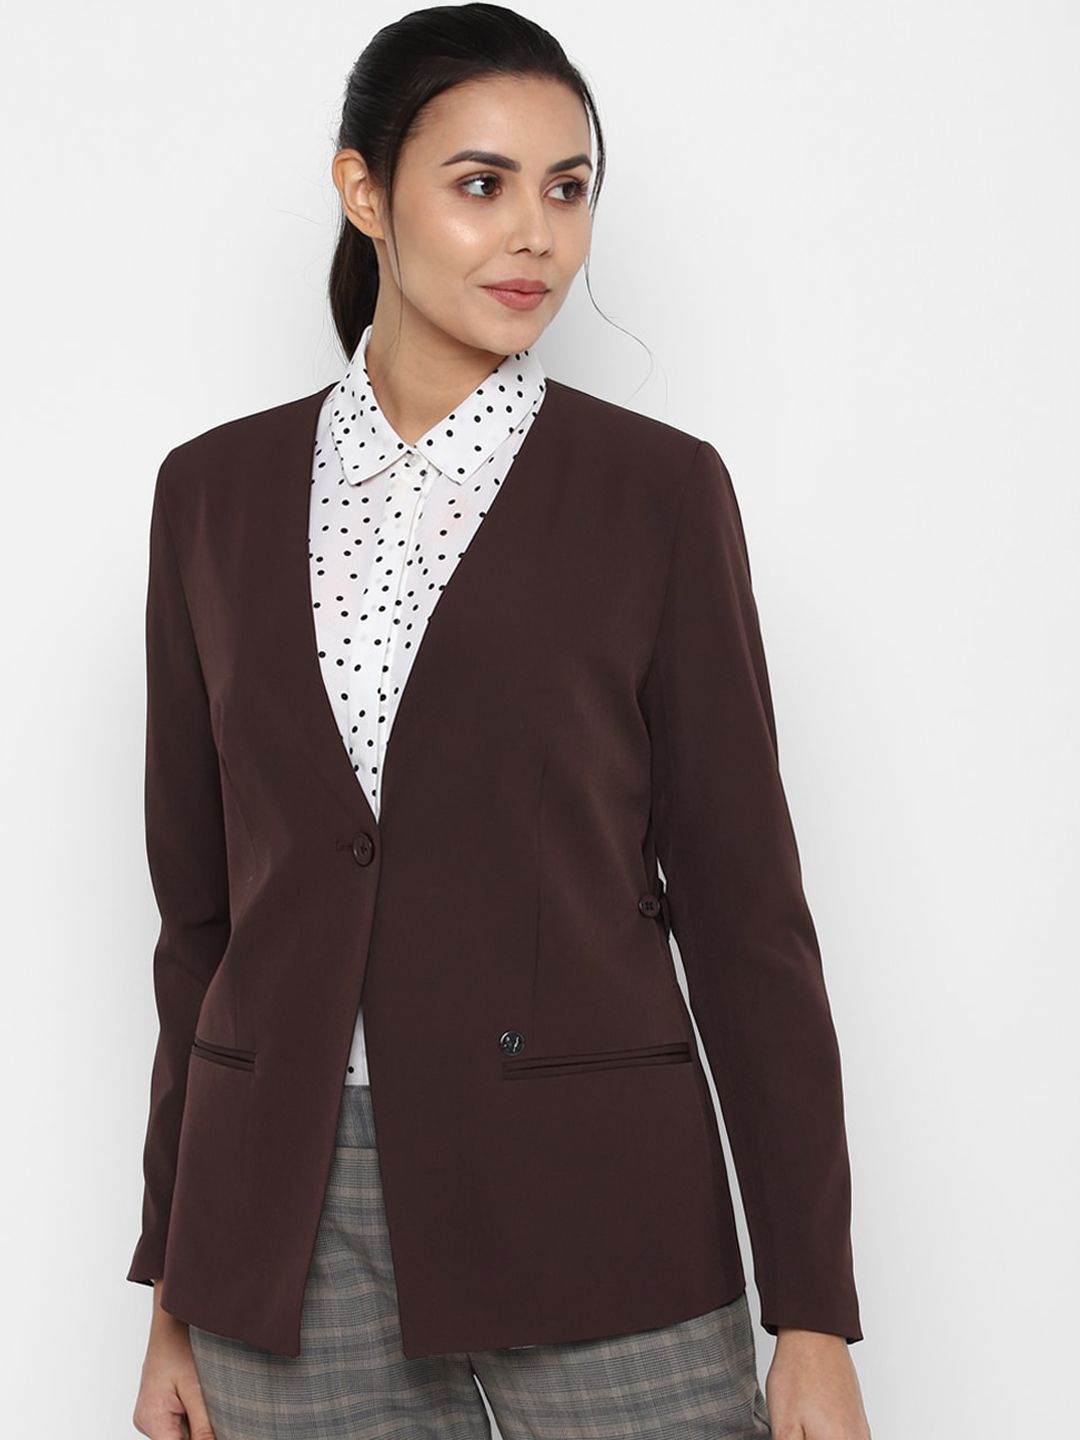 Allen Solly Woman Brown Solid Single Breasted Casual Blazers Price in India